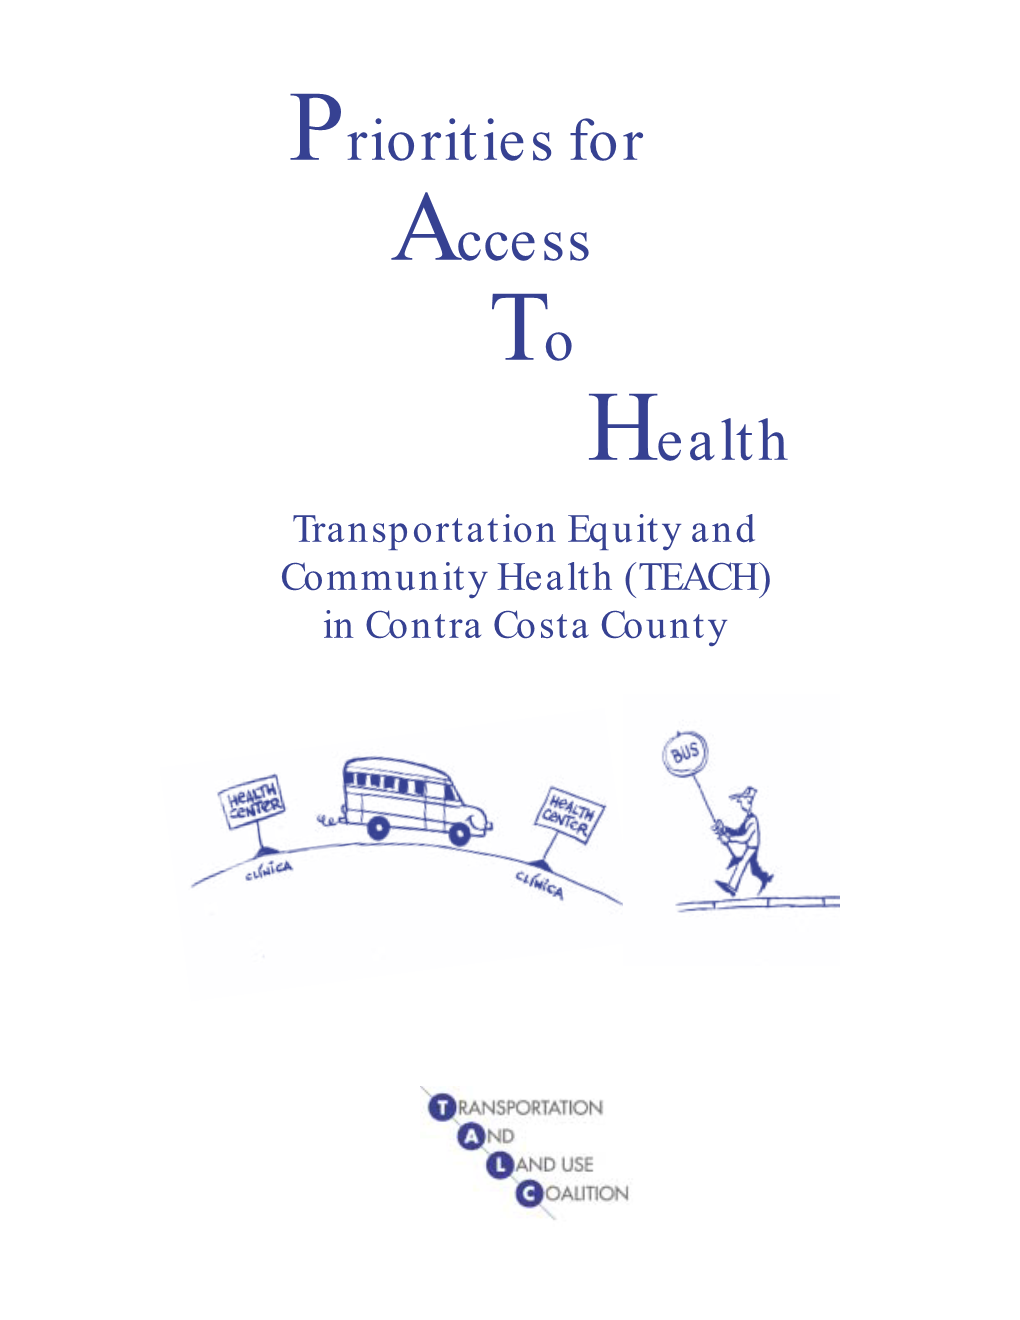 Priorities for Access Health